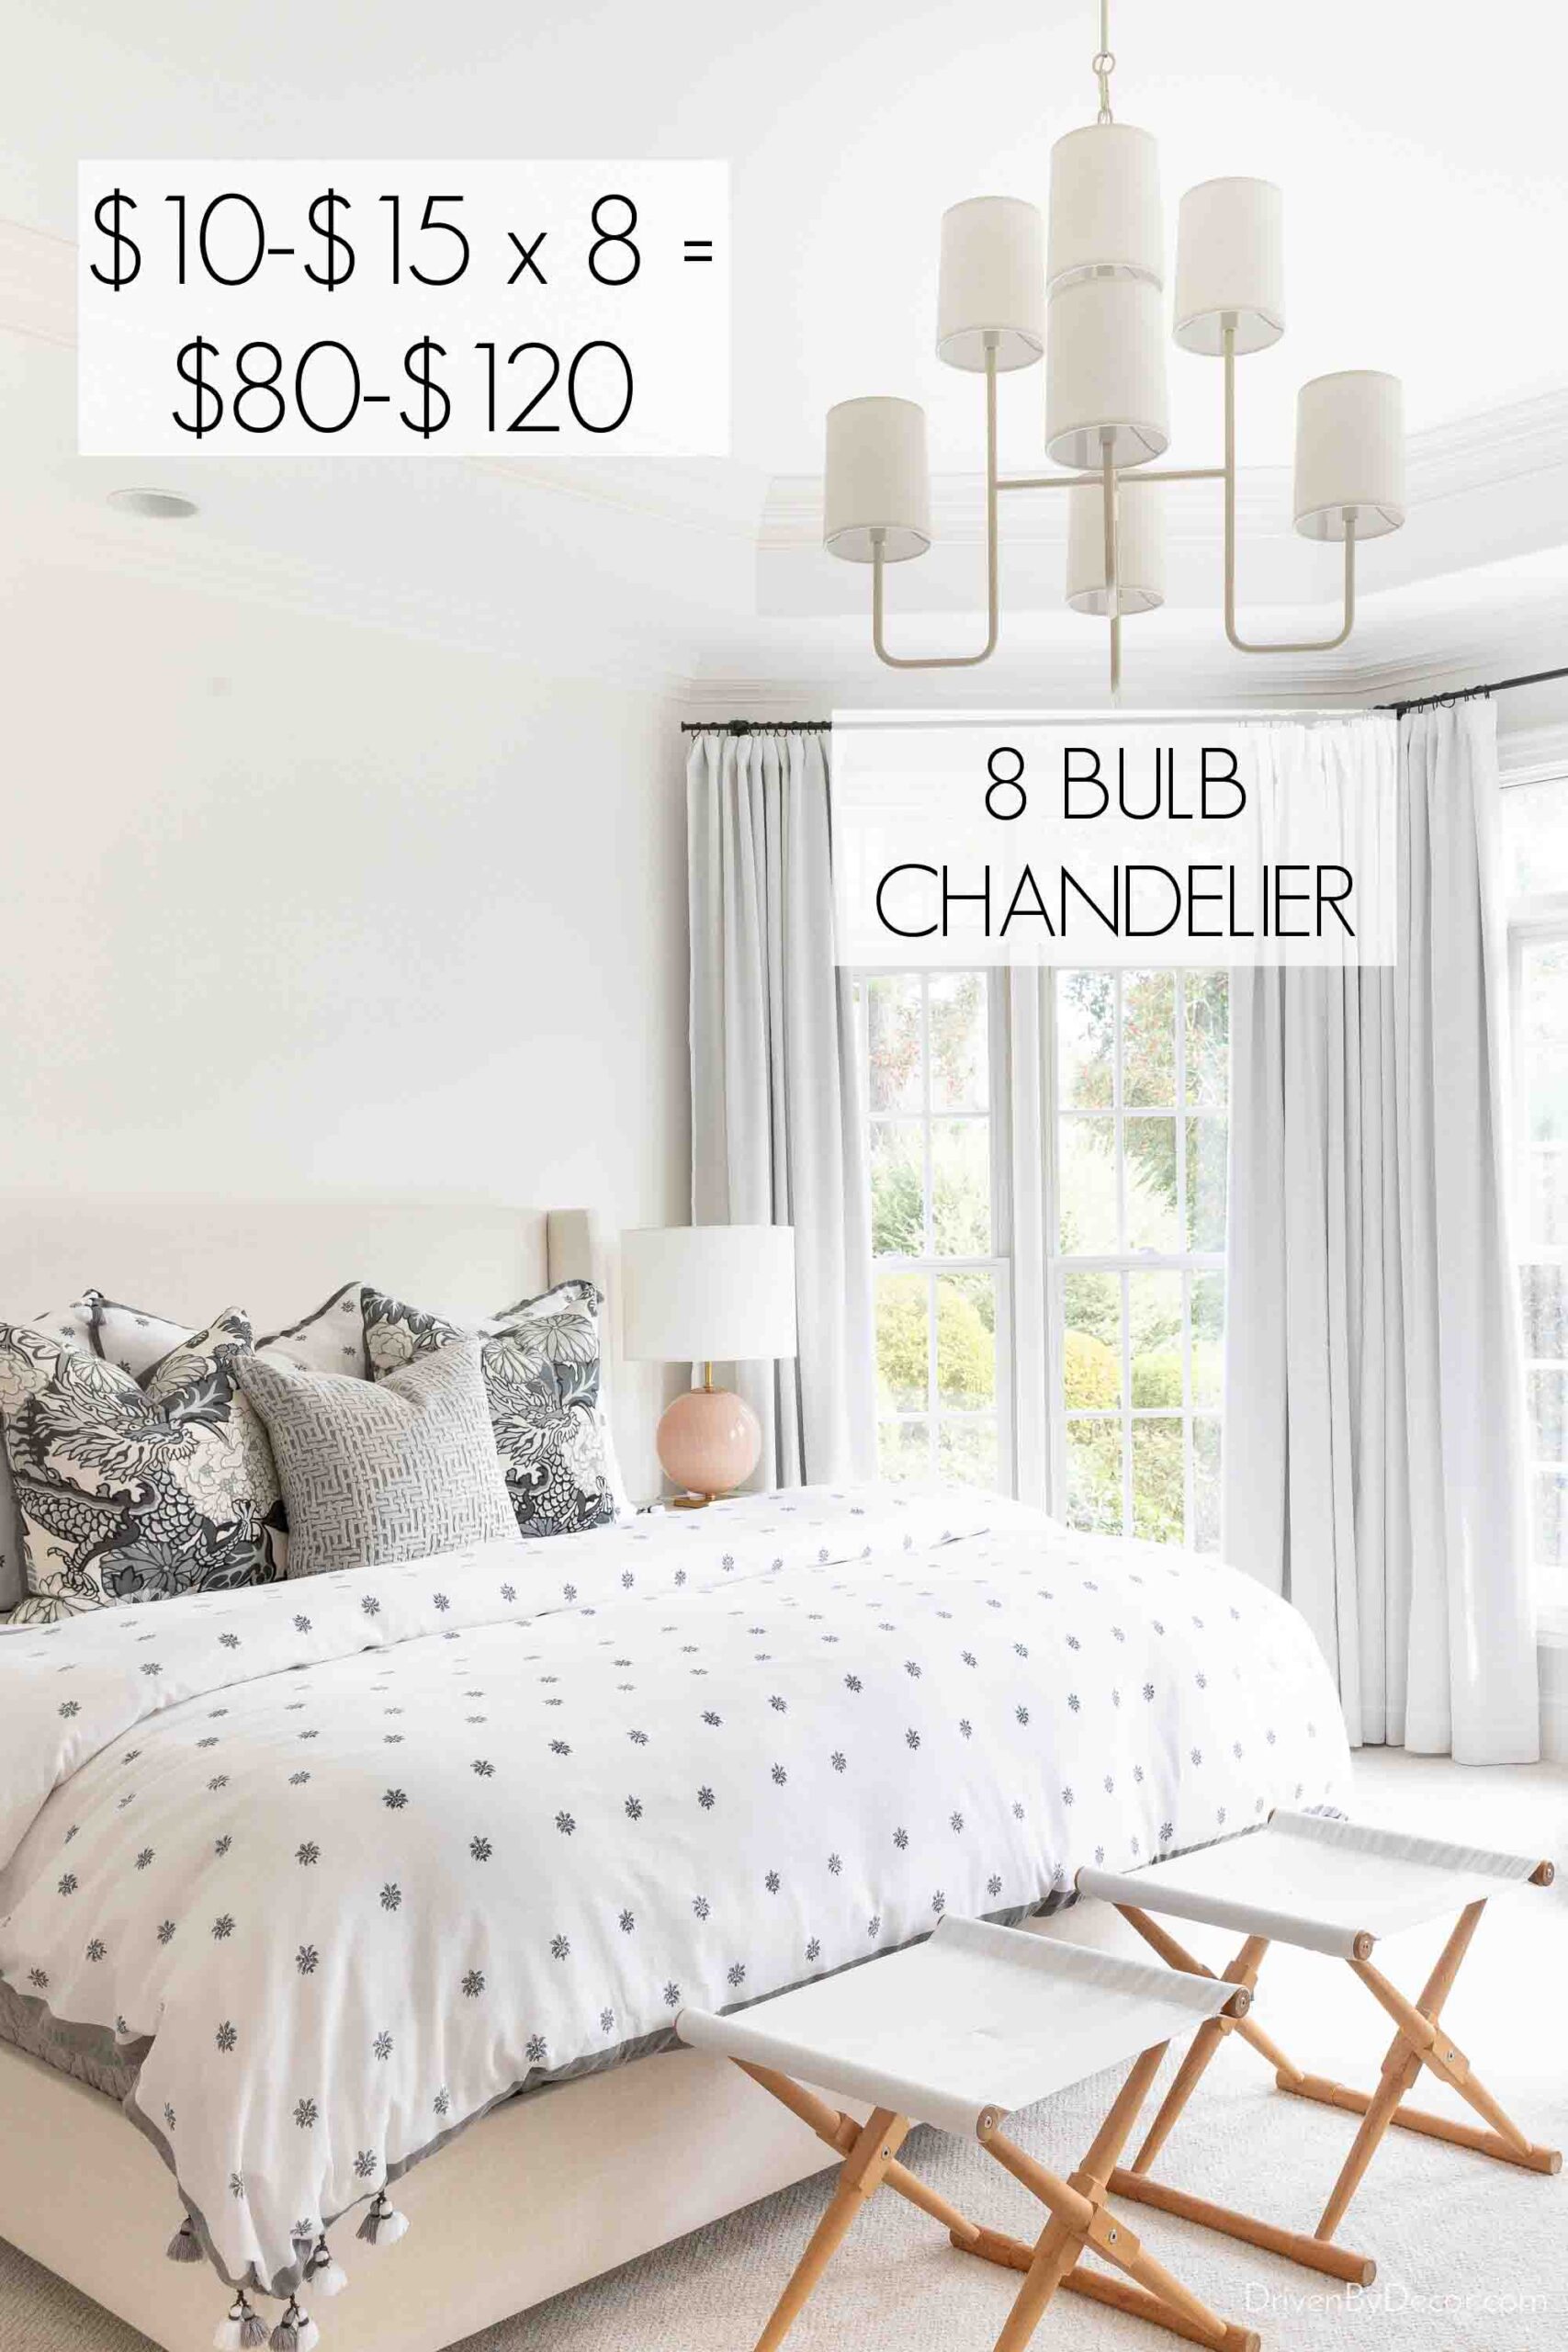 Cost calculation of smart bulbs for 8-bulb chandelier